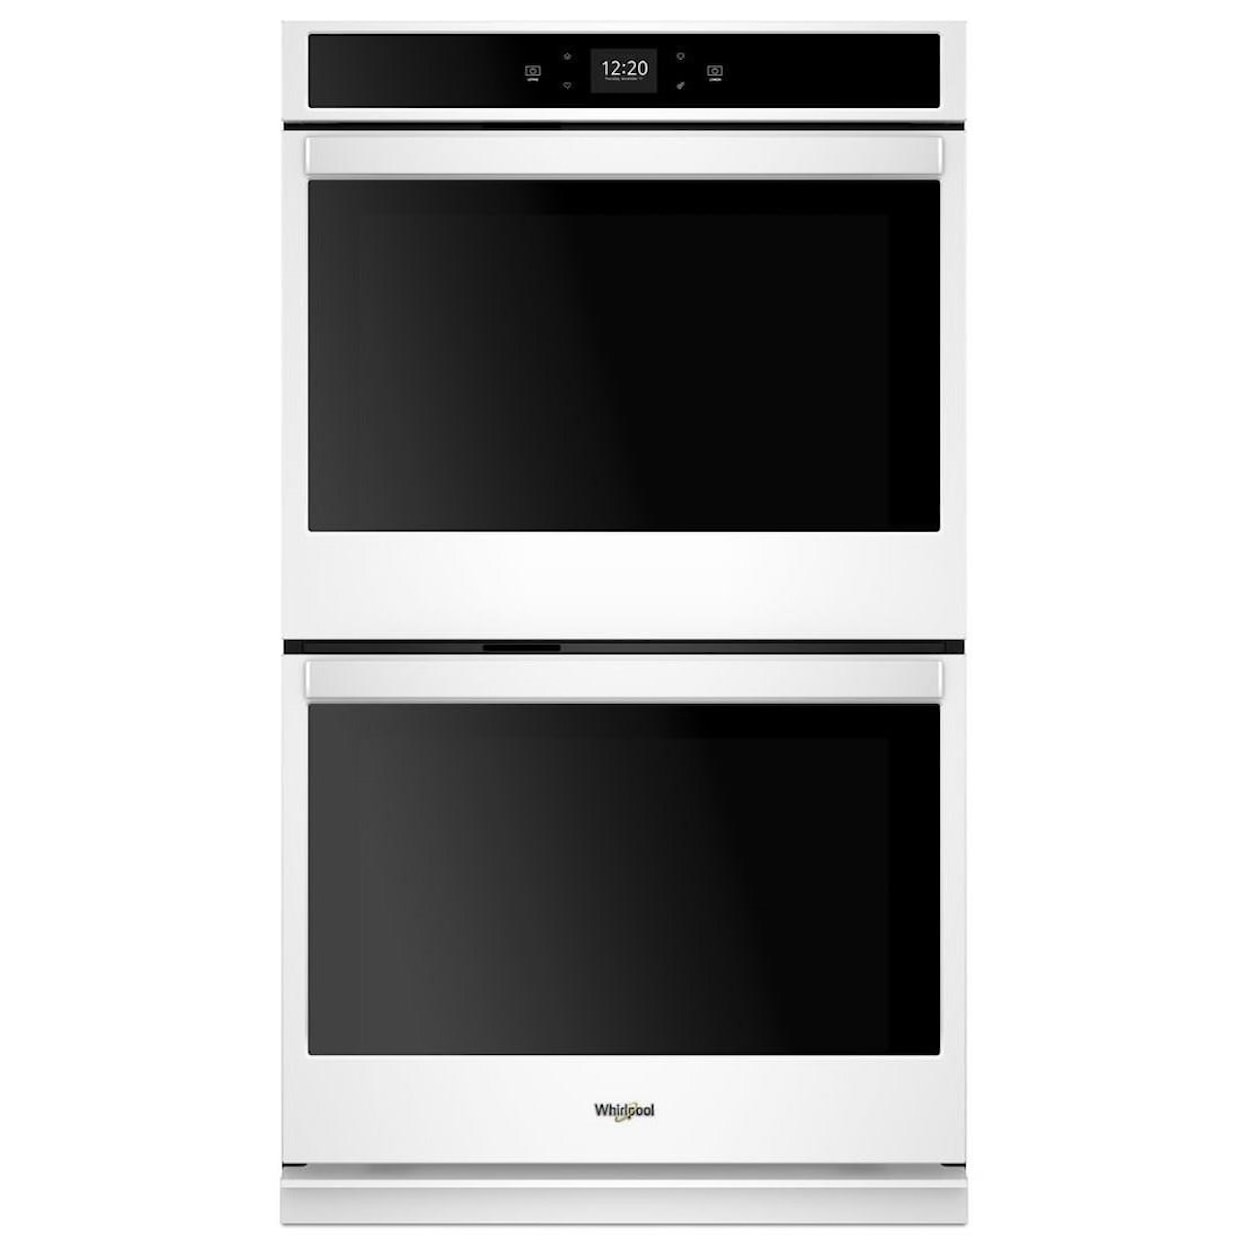 Whirlpool Electric Wall Ovens - Whirlpool 8.6 cu. ft. Smart Double Wall Oven